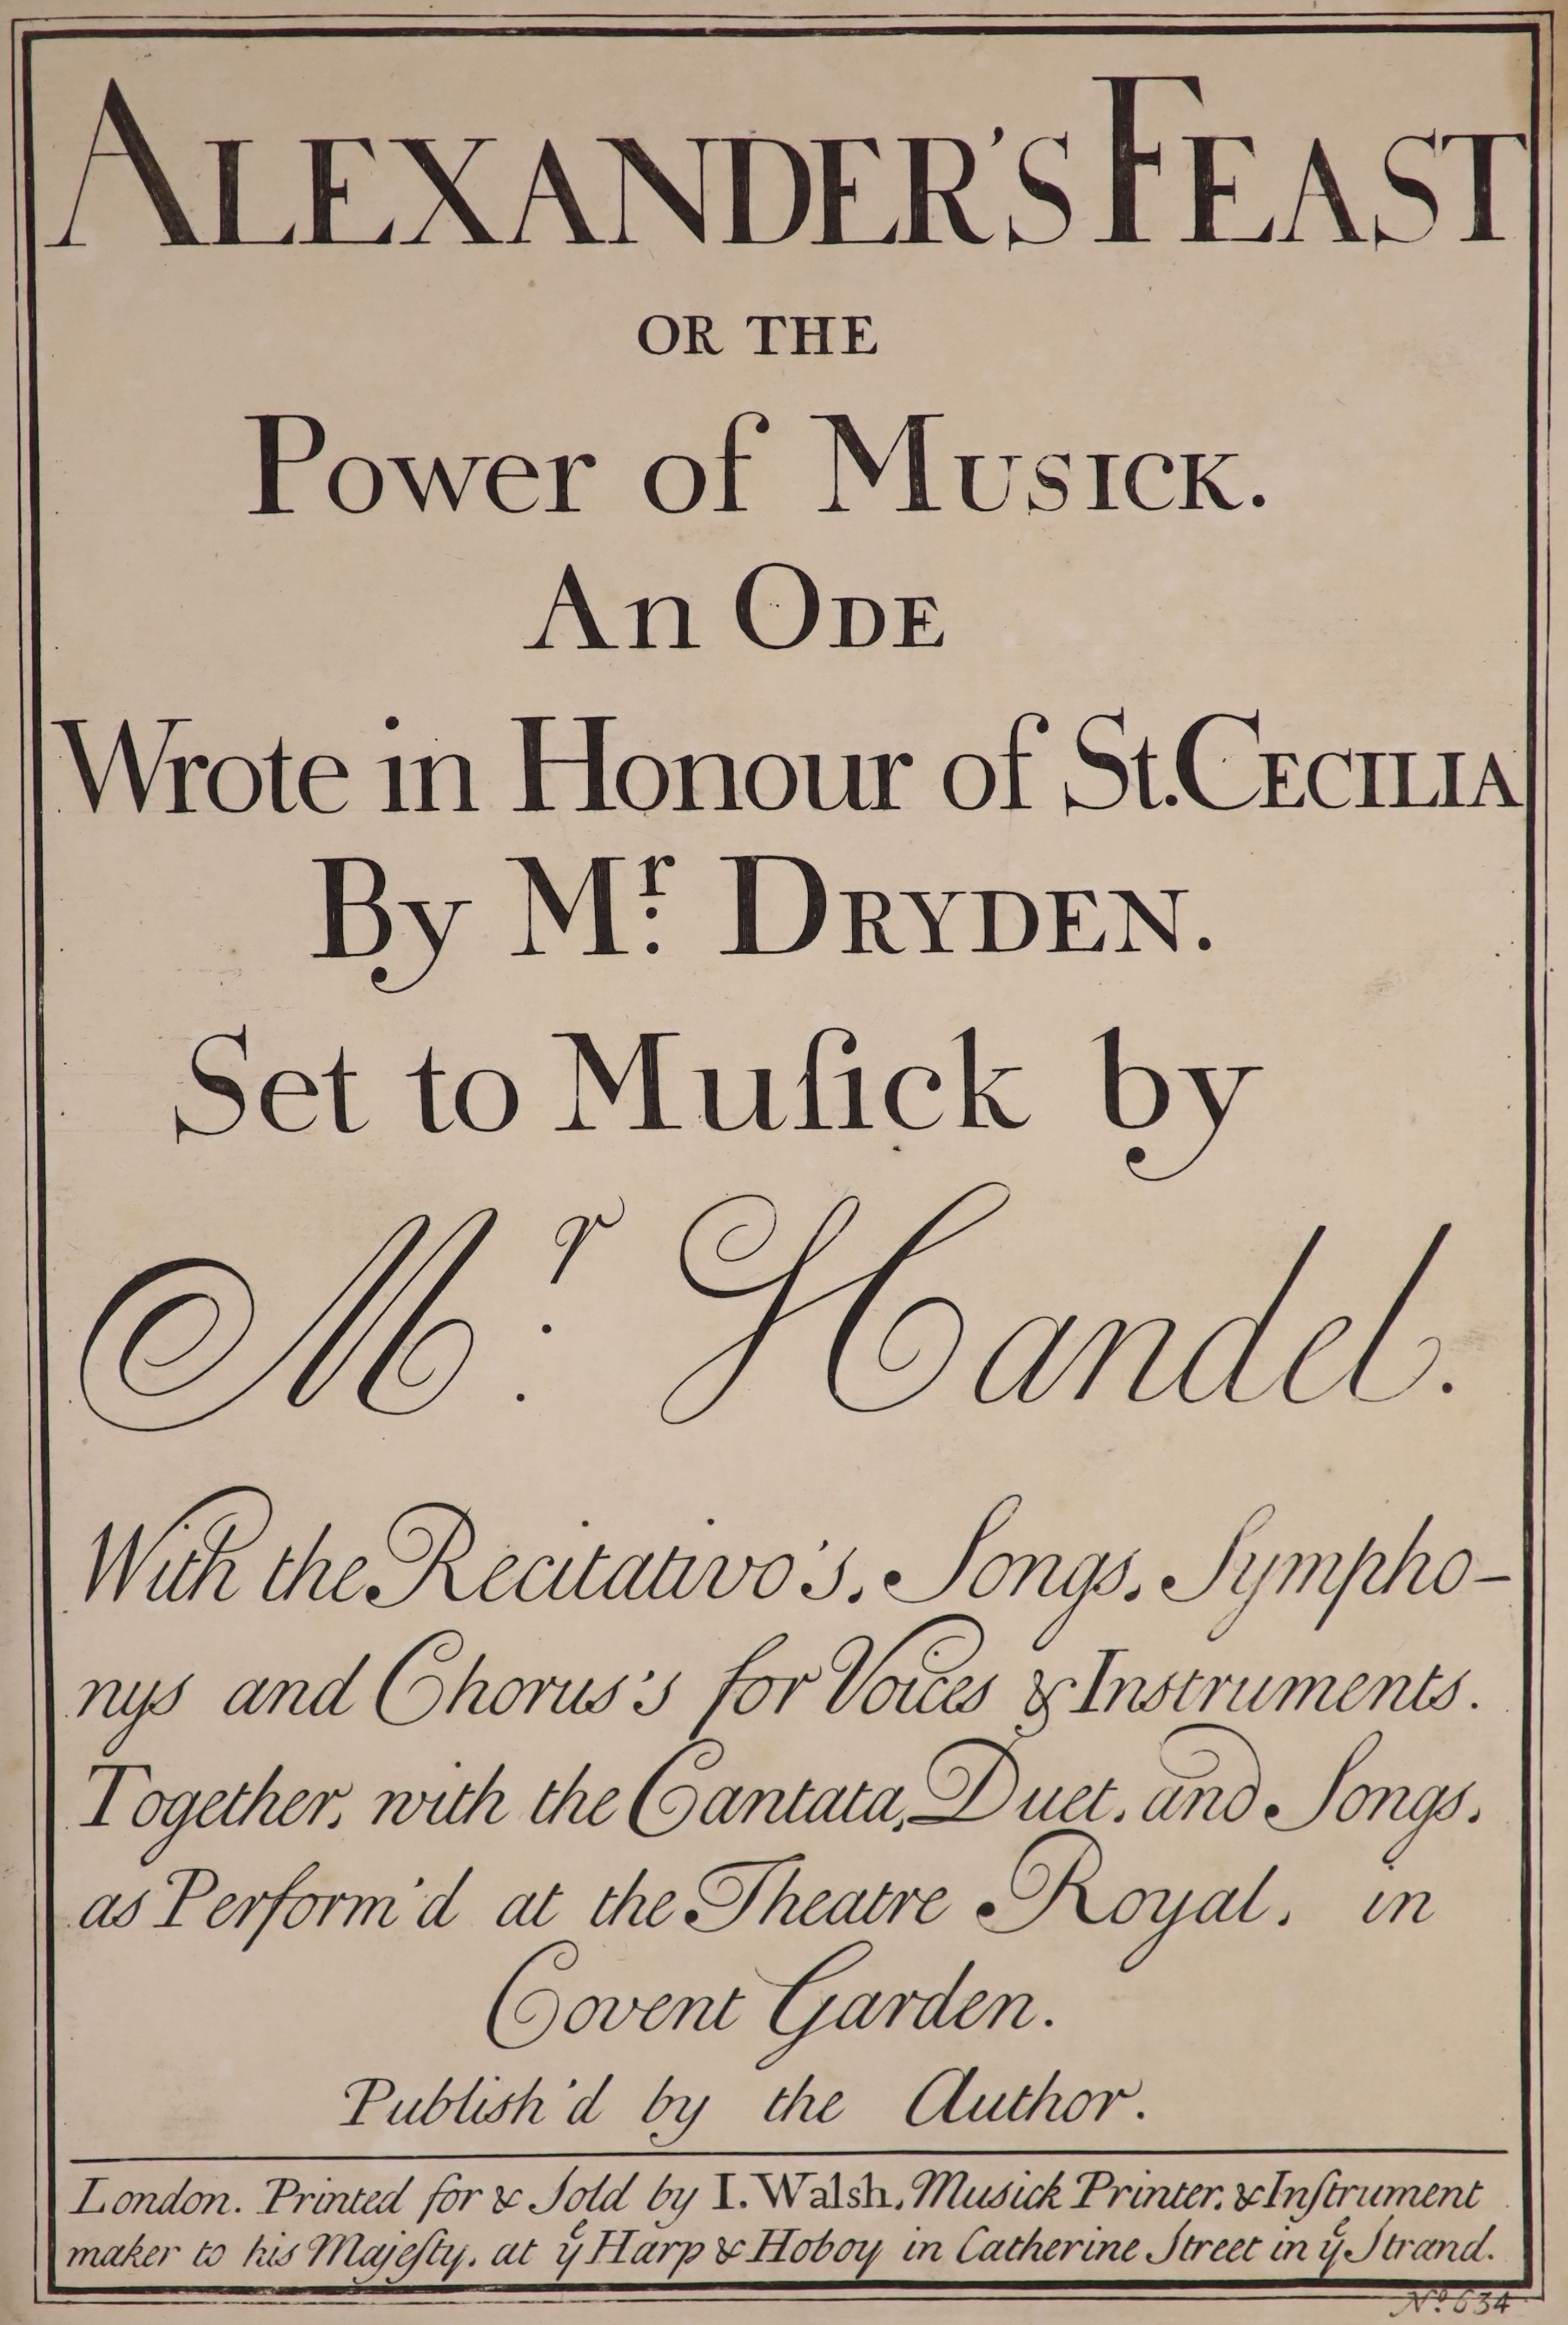 ° Dryden, John. and Handel, George Frideric - Alexander’s Feast or the Power of Musick (sic). An Ode